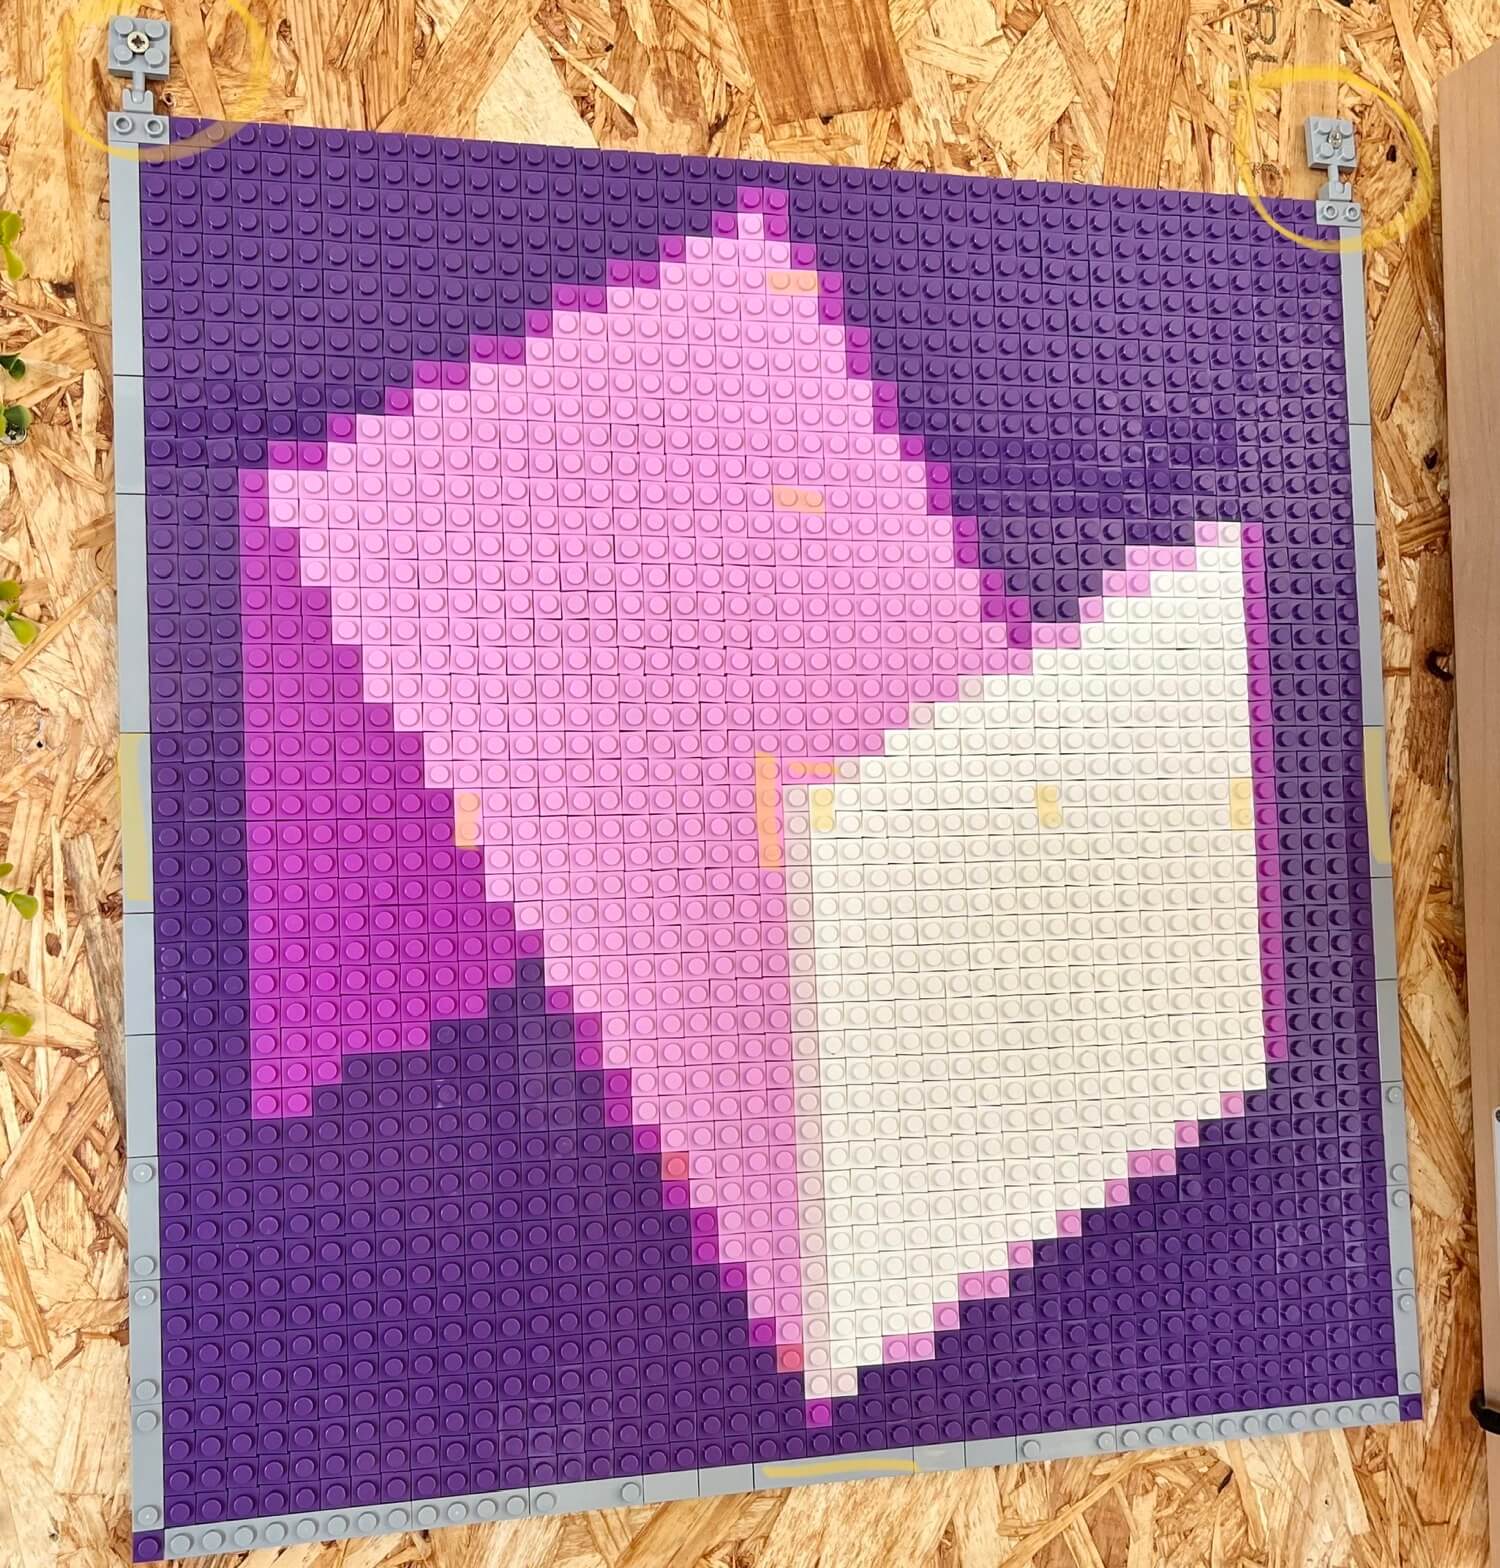 Nozbe logo as a Lego mosaic - a fantastic gift from Augusto Pinaud! Improved